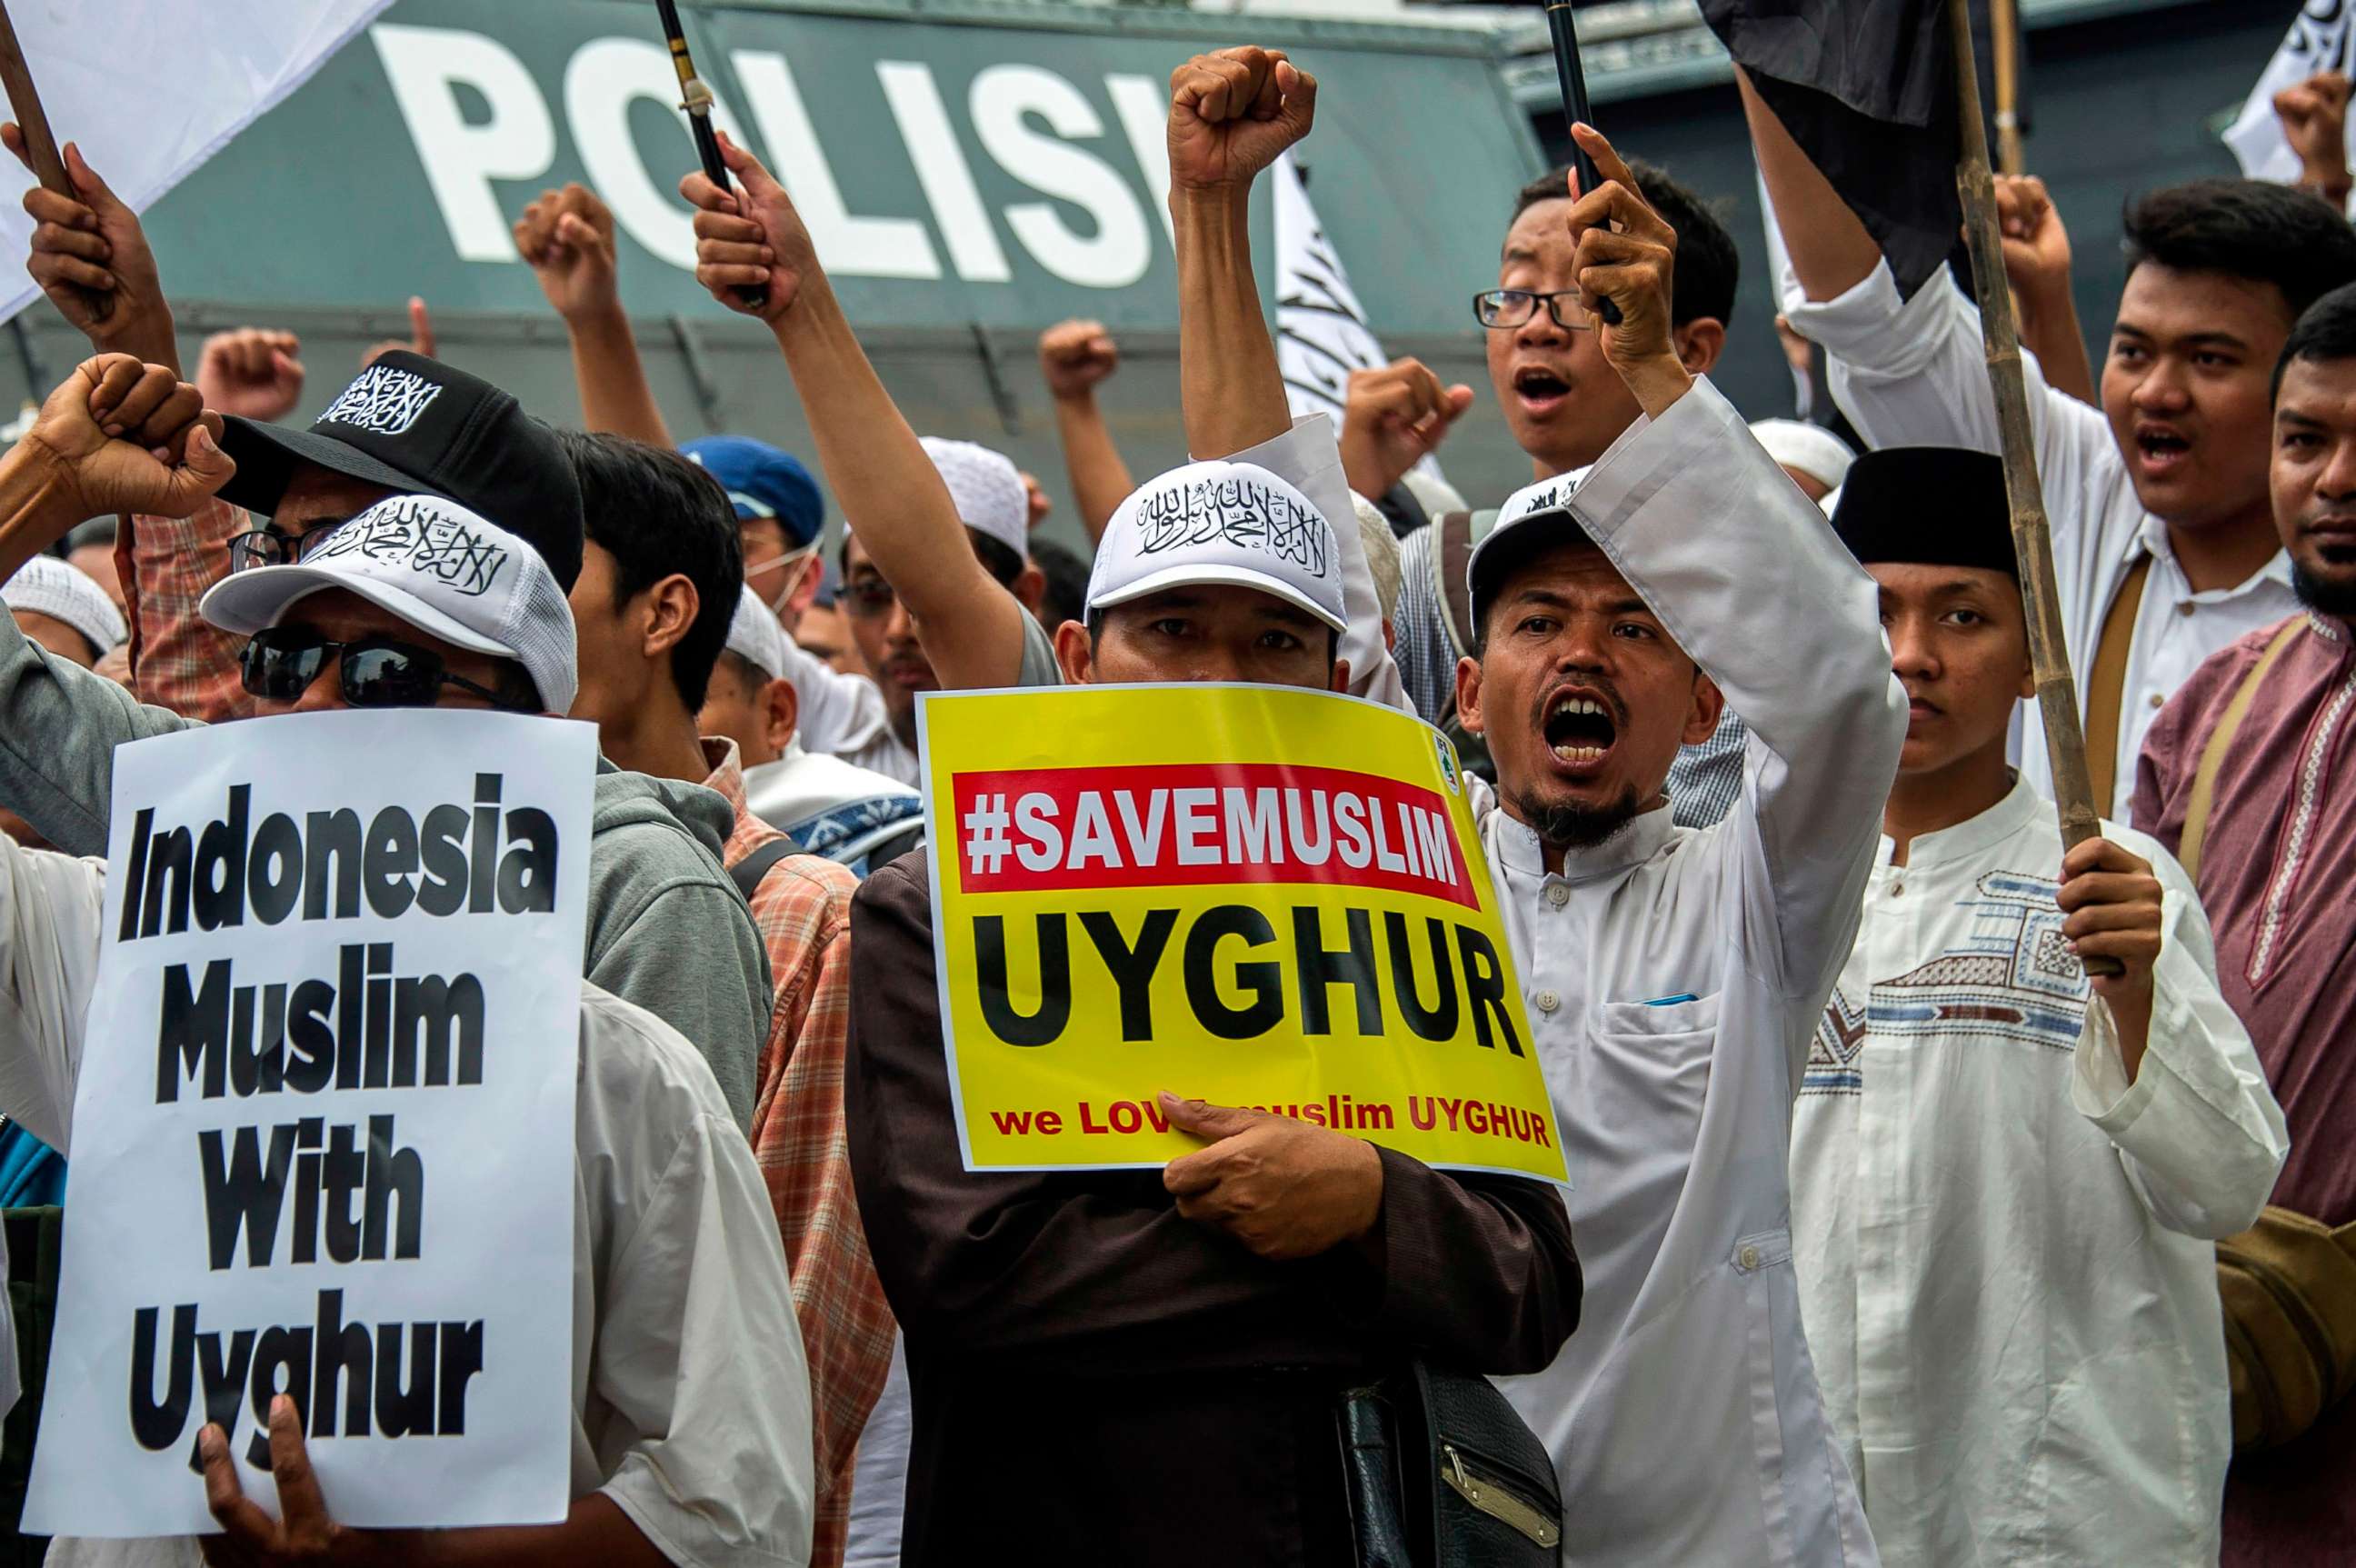 Break Their Lineage, Break Their Roots”: China's Crimes against Humanity  Targeting Uyghurs and Other Turkic Muslims